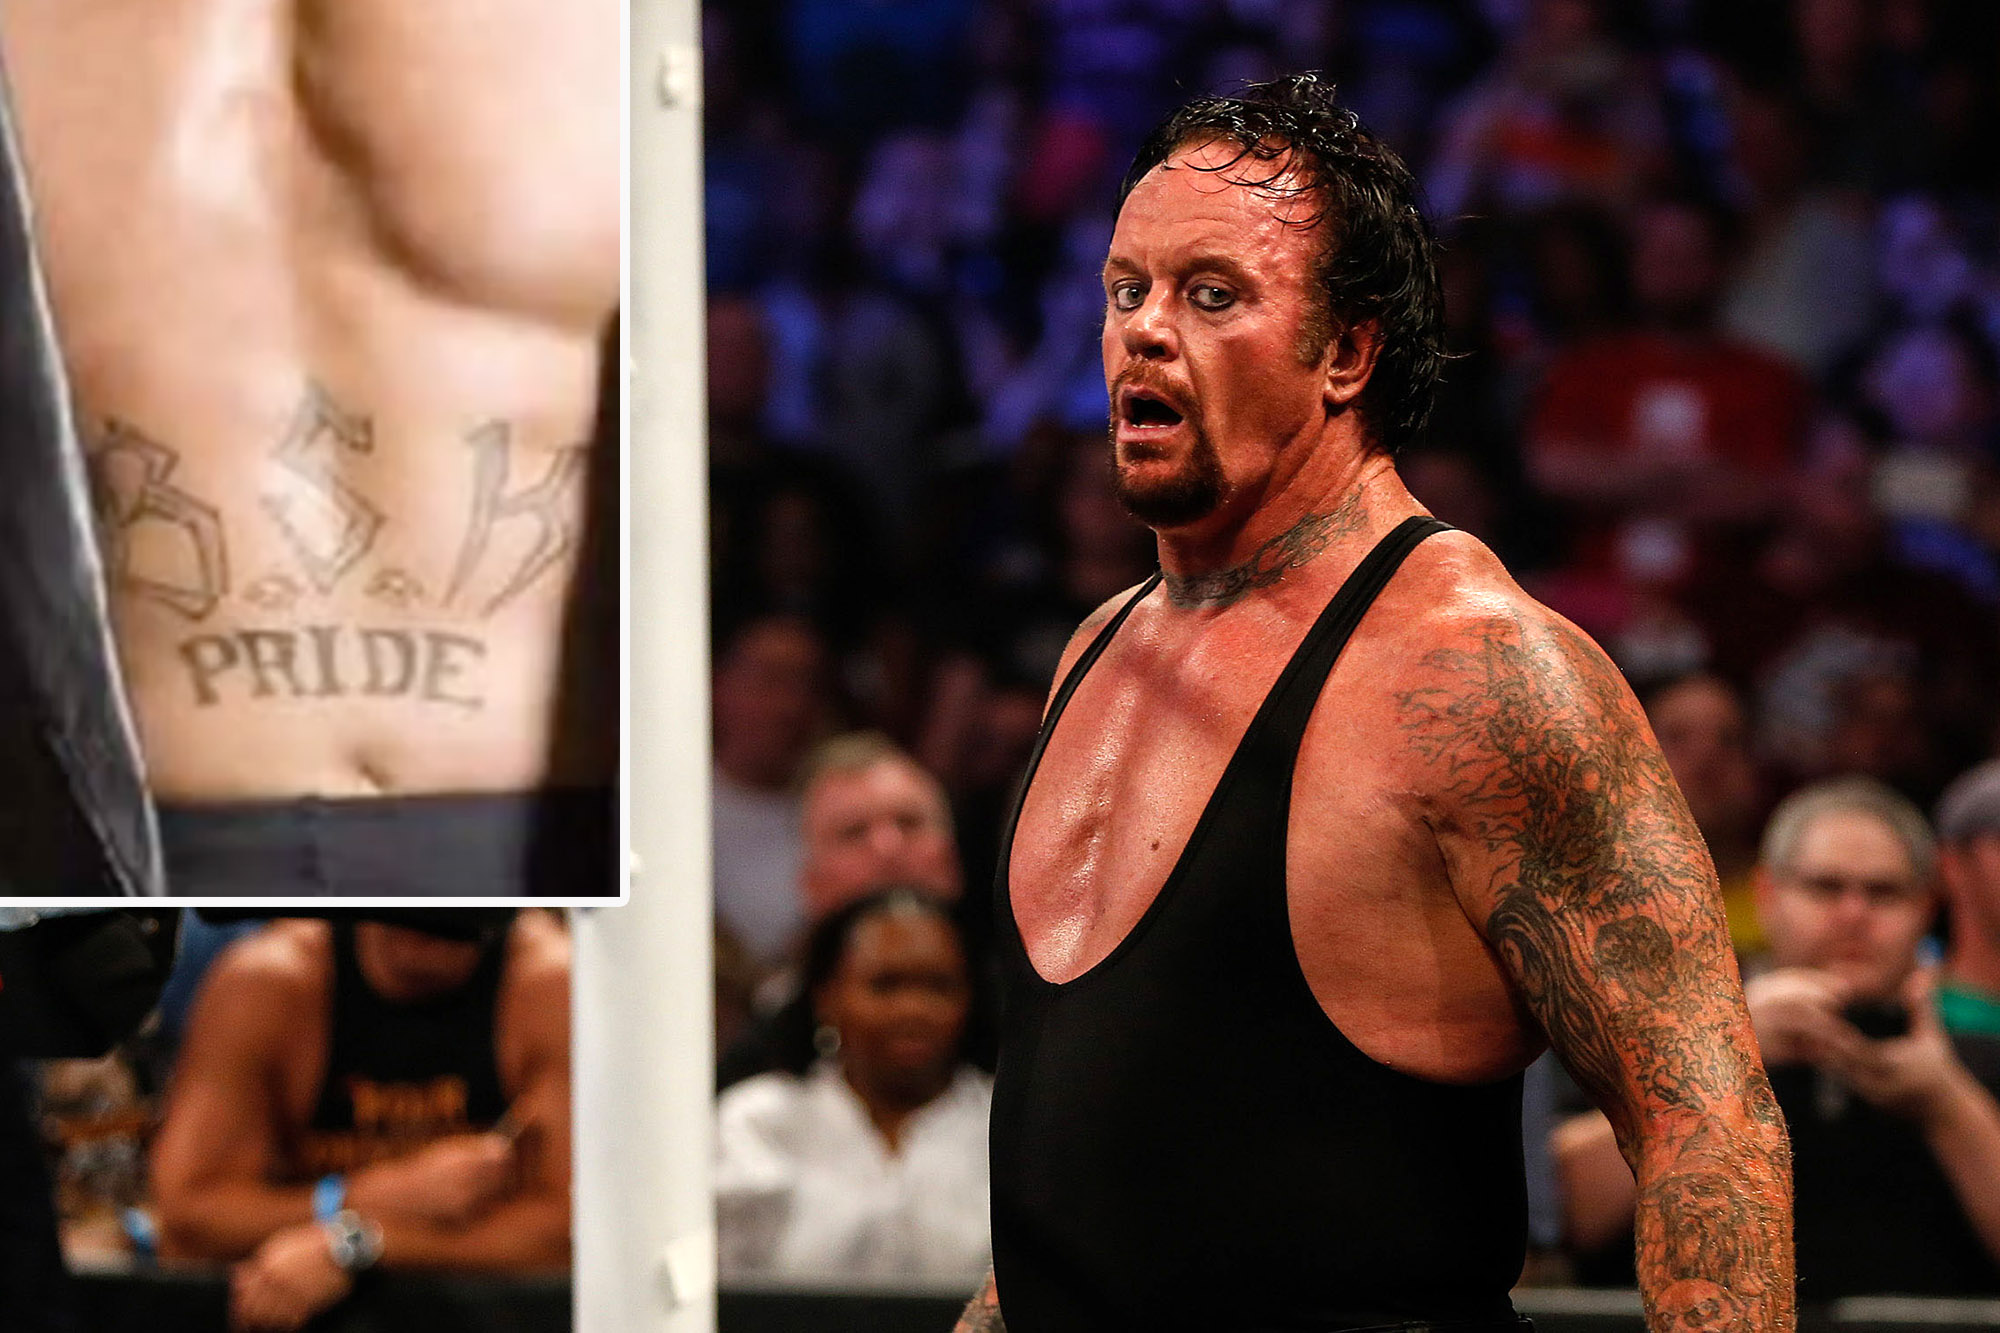 Undertakers neck tatto has got much attention  Thewistle